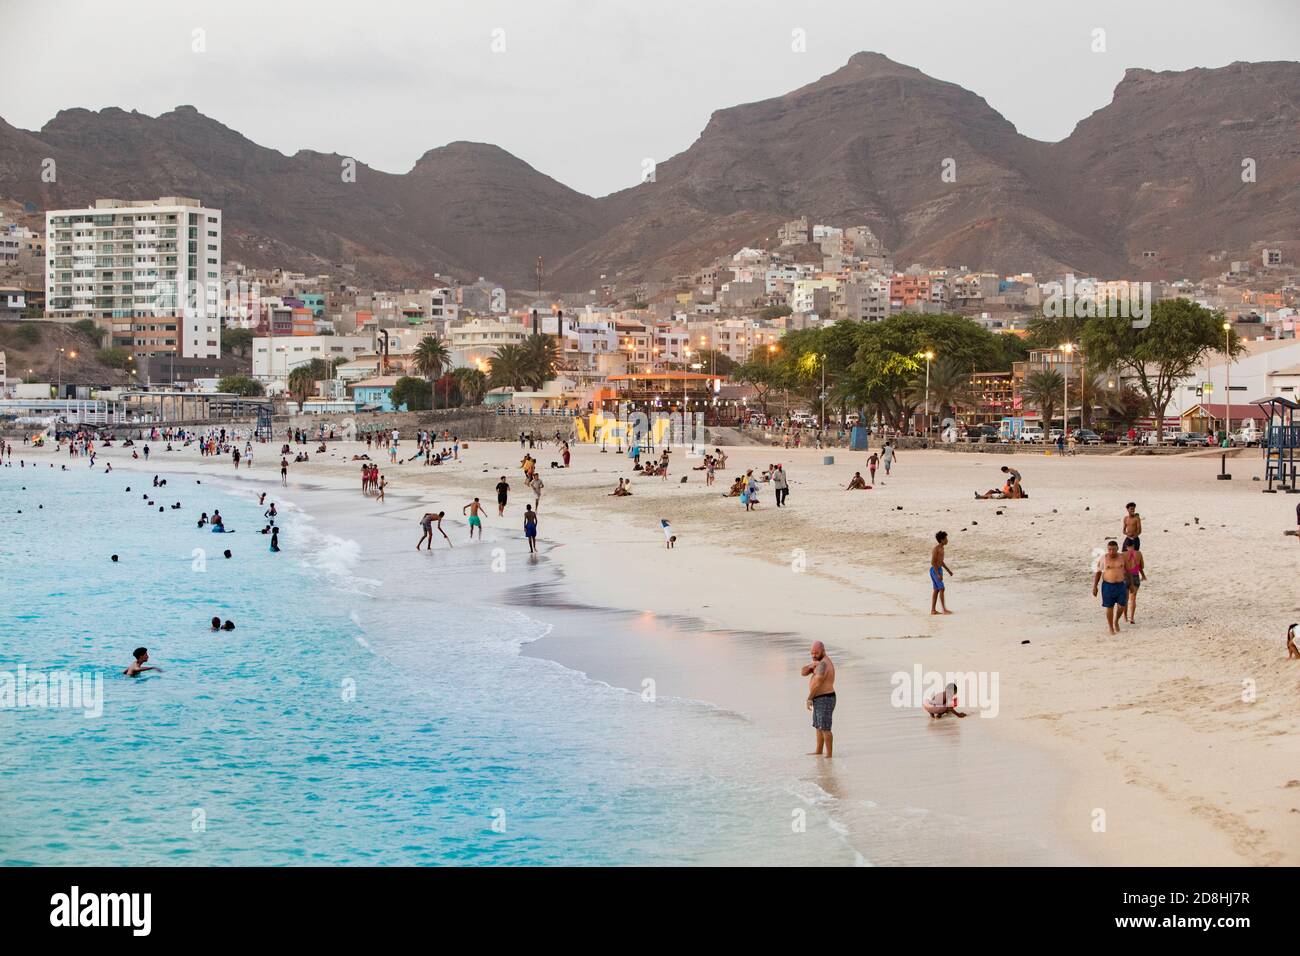 Mindelo is the colorful and vibrant waterfront capital of Sao Vicente island, Cabo Verde. Stock Photo